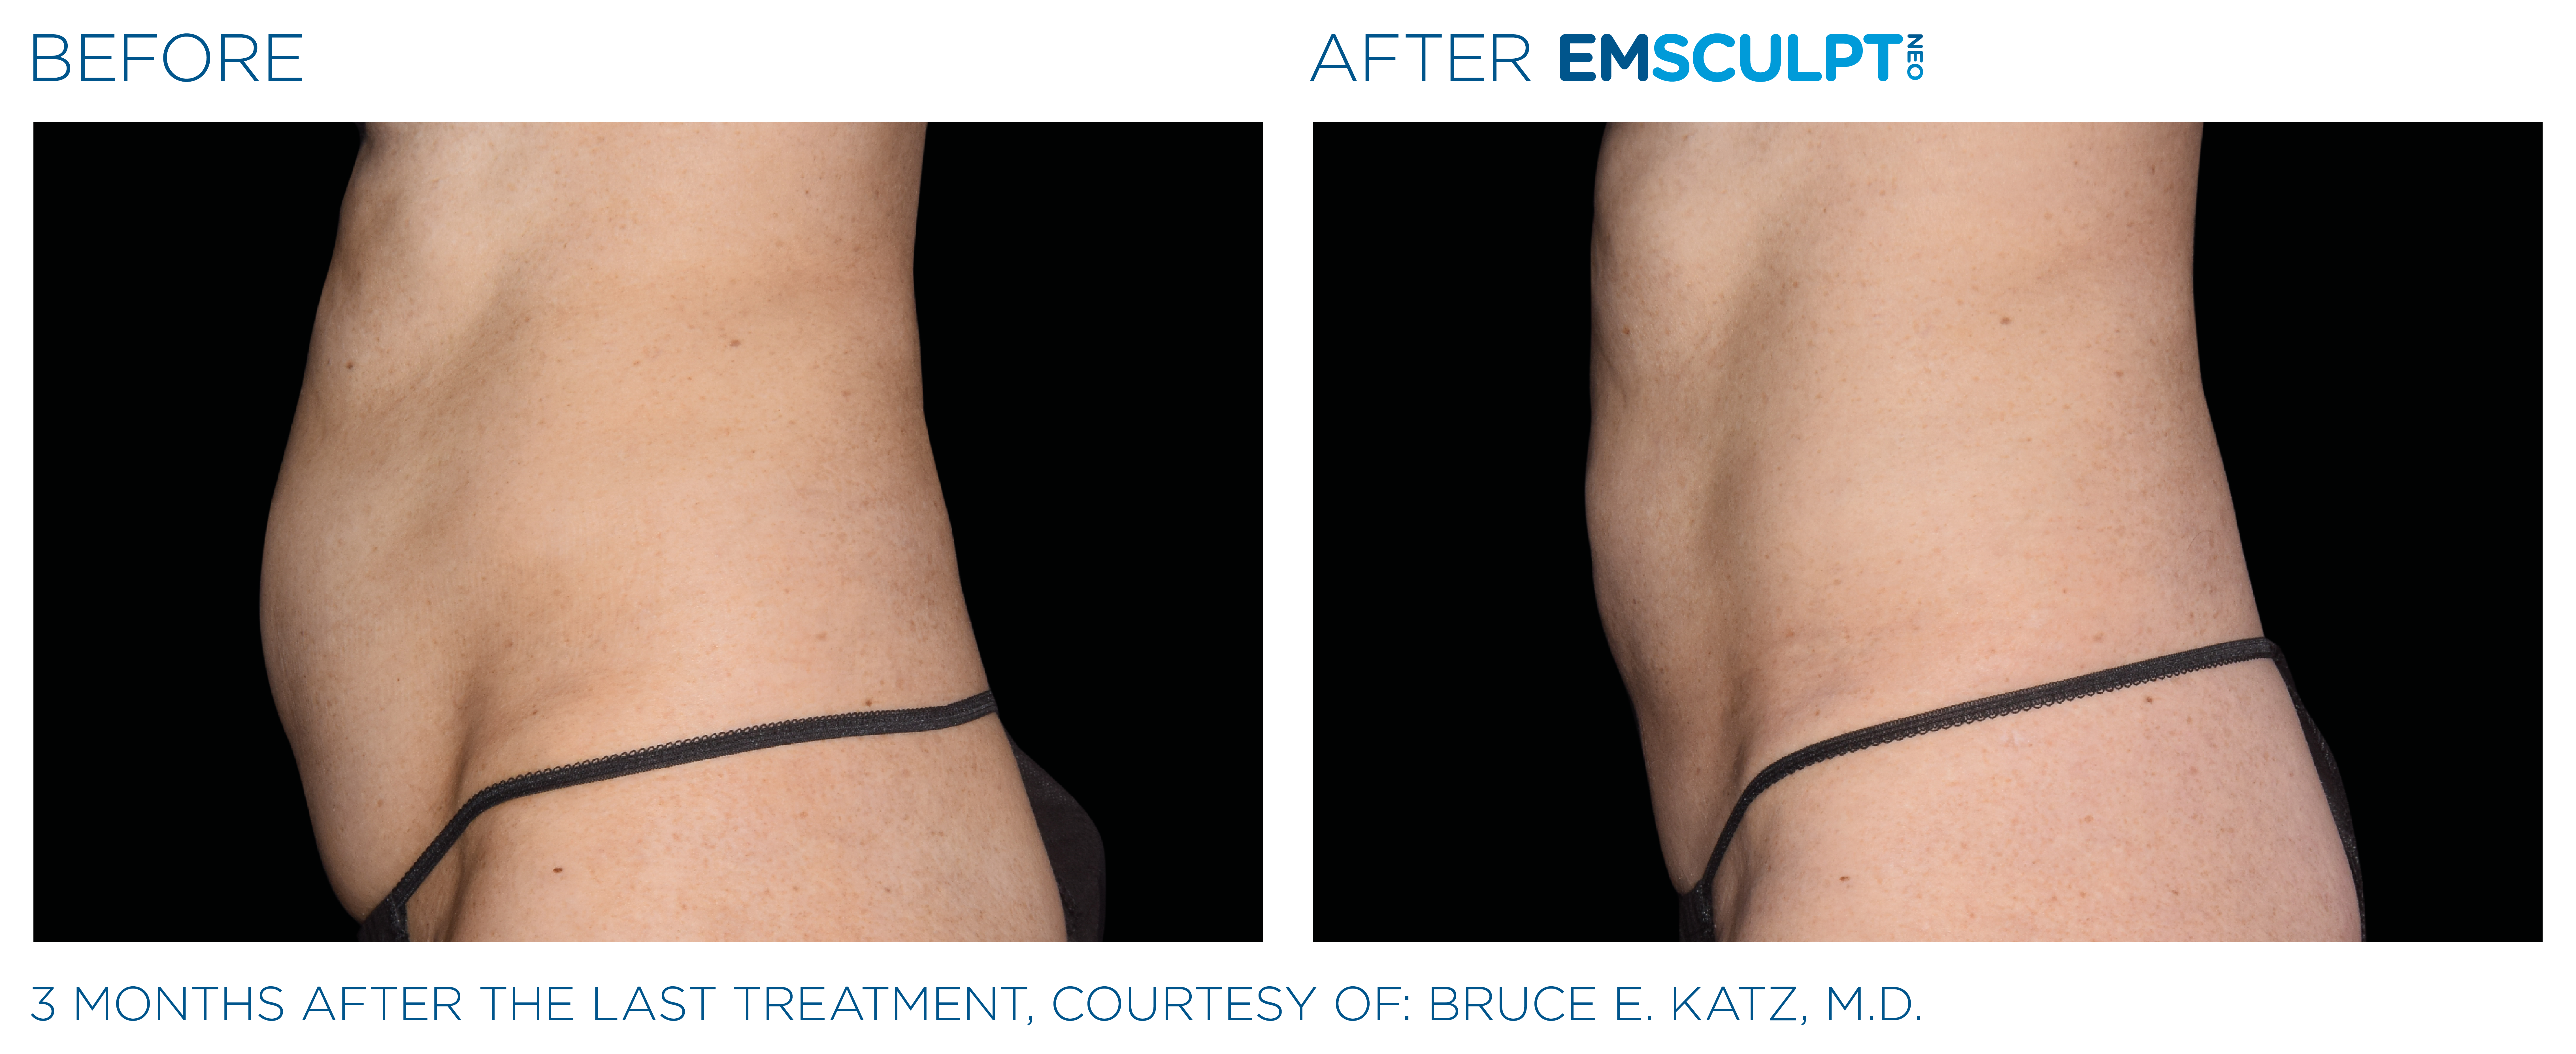 Female abdomen before and after Emsculpt NEO body sculpting.